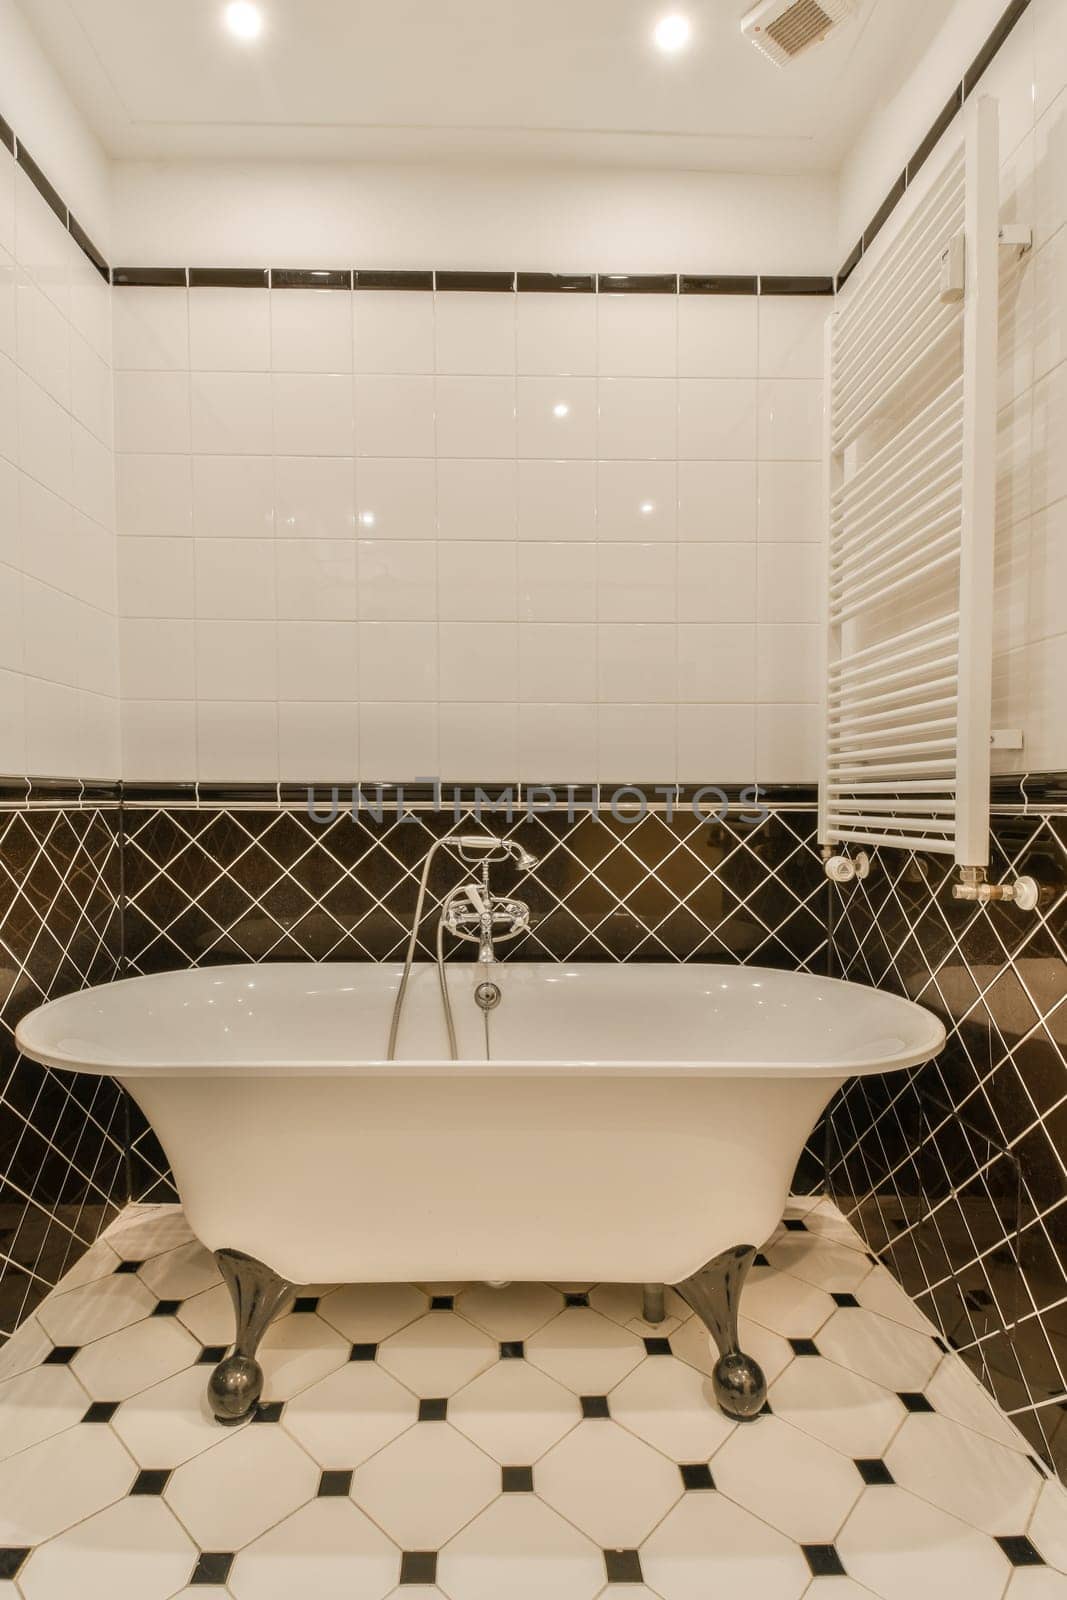 a bathroom with black and white tiles on the walls, floor, and bathtub in it's corner